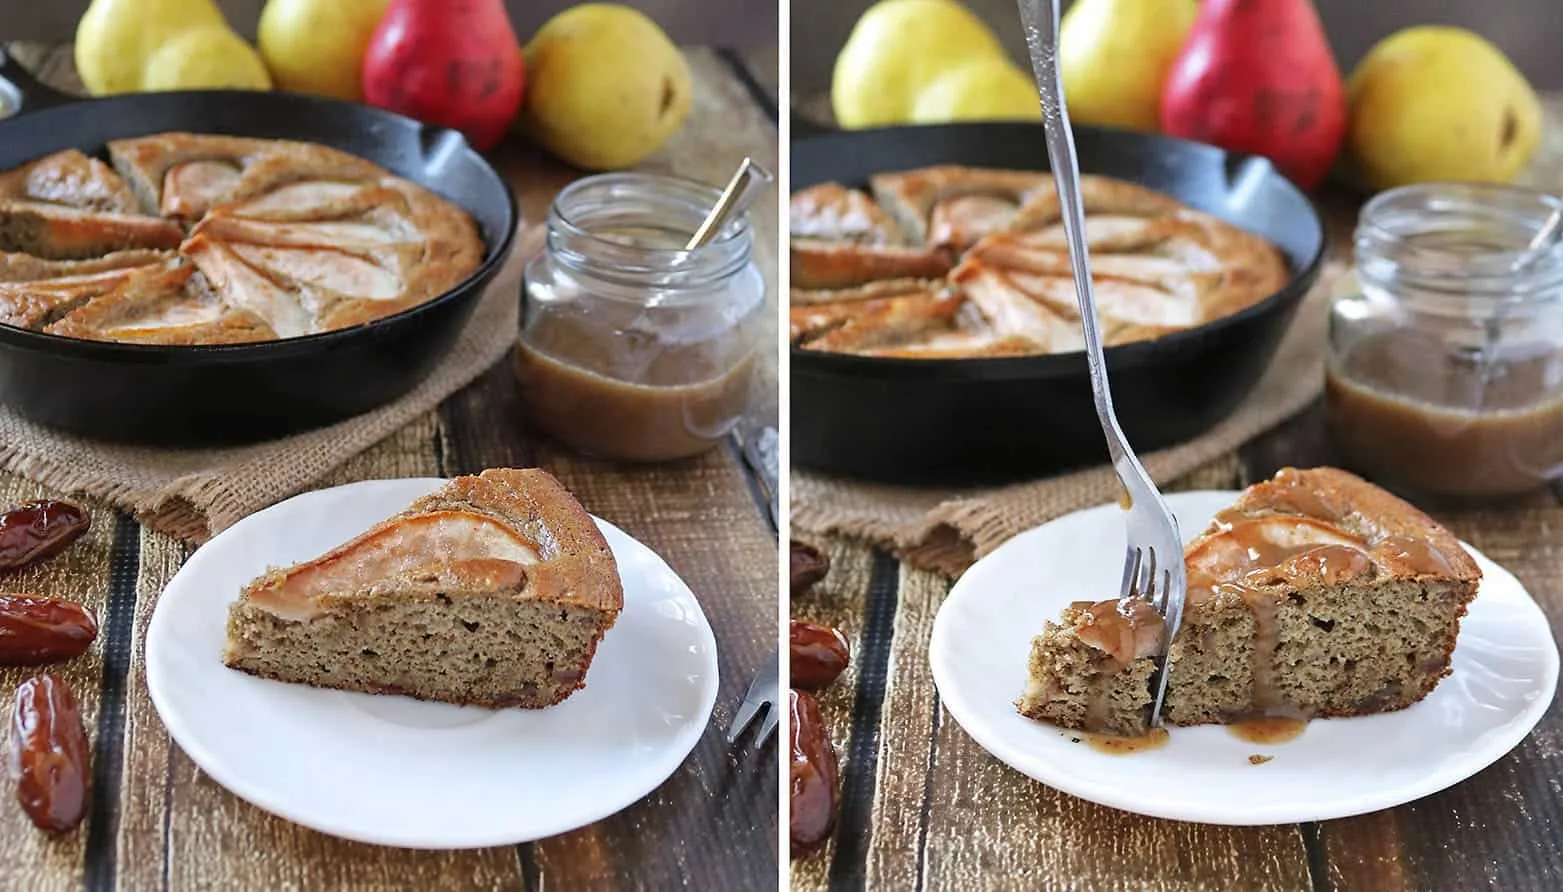 This Pear and Date Skillet Cake whips up in the Blender and is Gluten-Free, Refined Sugar-Free, and Dairy Free.